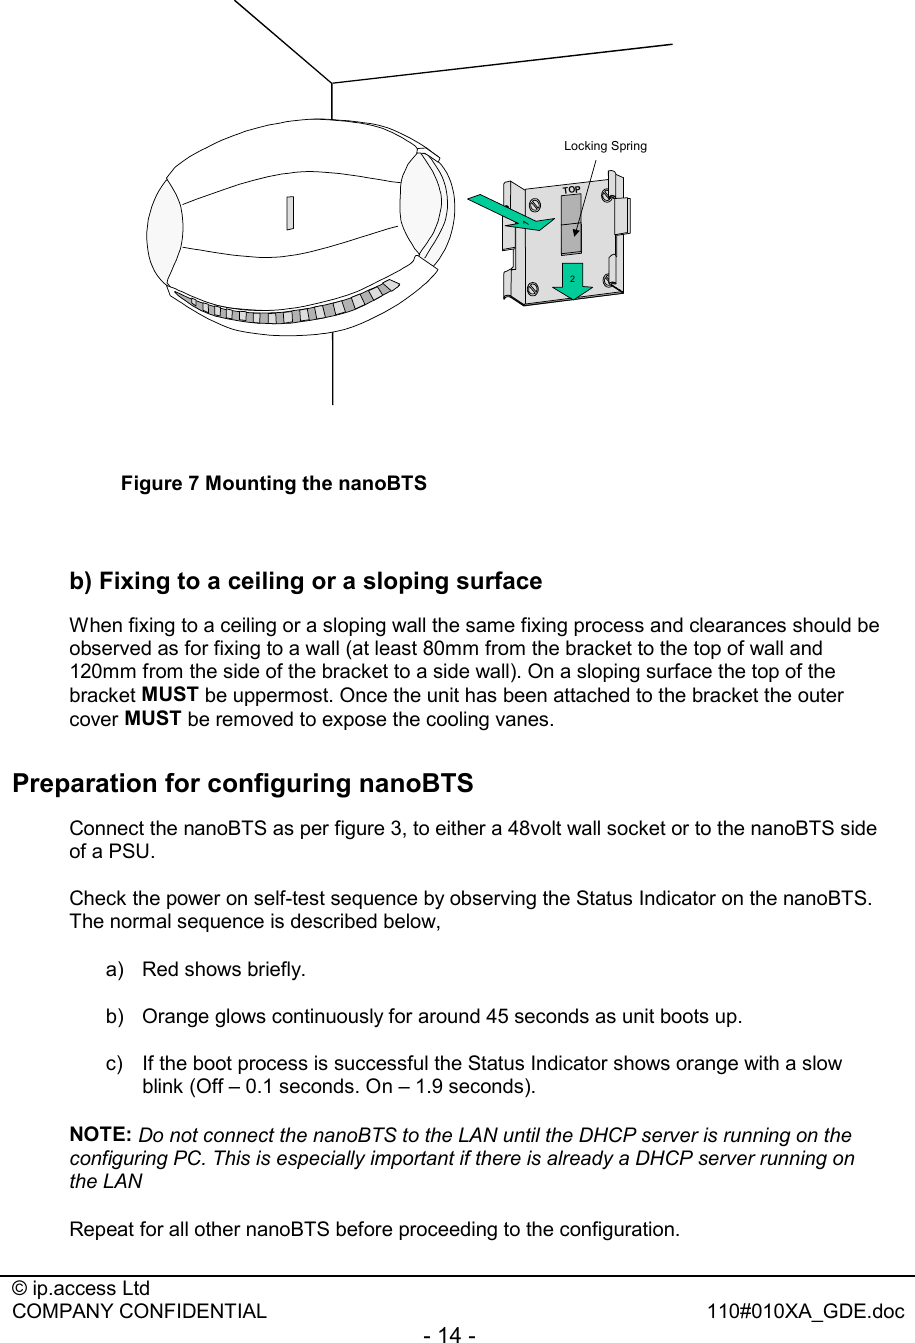  © ip.access Ltd   COMPANY CONFIDENTIAL  110#010XA_GDE.doc - 14 -  2Locking Spring1TOP Figure 7 Mounting the nanoBTS  b) Fixing to a ceiling or a sloping surface When fixing to a ceiling or a sloping wall the same fixing process and clearances should be observed as for fixing to a wall (at least 80mm from the bracket to the top of wall and 120mm from the side of the bracket to a side wall). On a sloping surface the top of the bracket MUST be uppermost. Once the unit has been attached to the bracket the outer cover MUST be removed to expose the cooling vanes. Preparation for configuring nanoBTS Connect the nanoBTS as per figure 3, to either a 48volt wall socket or to the nanoBTS side of a PSU. Check the power on self-test sequence by observing the Status Indicator on the nanoBTS. The normal sequence is described below, a) Red shows briefly. b)  Orange glows continuously for around 45 seconds as unit boots up. c)  If the boot process is successful the Status Indicator shows orange with a slow blink (Off – 0.1 seconds. On – 1.9 seconds). NOTE: Do not connect the nanoBTS to the LAN until the DHCP server is running on the configuring PC. This is especially important if there is already a DHCP server running on the LAN Repeat for all other nanoBTS before proceeding to the configuration. 